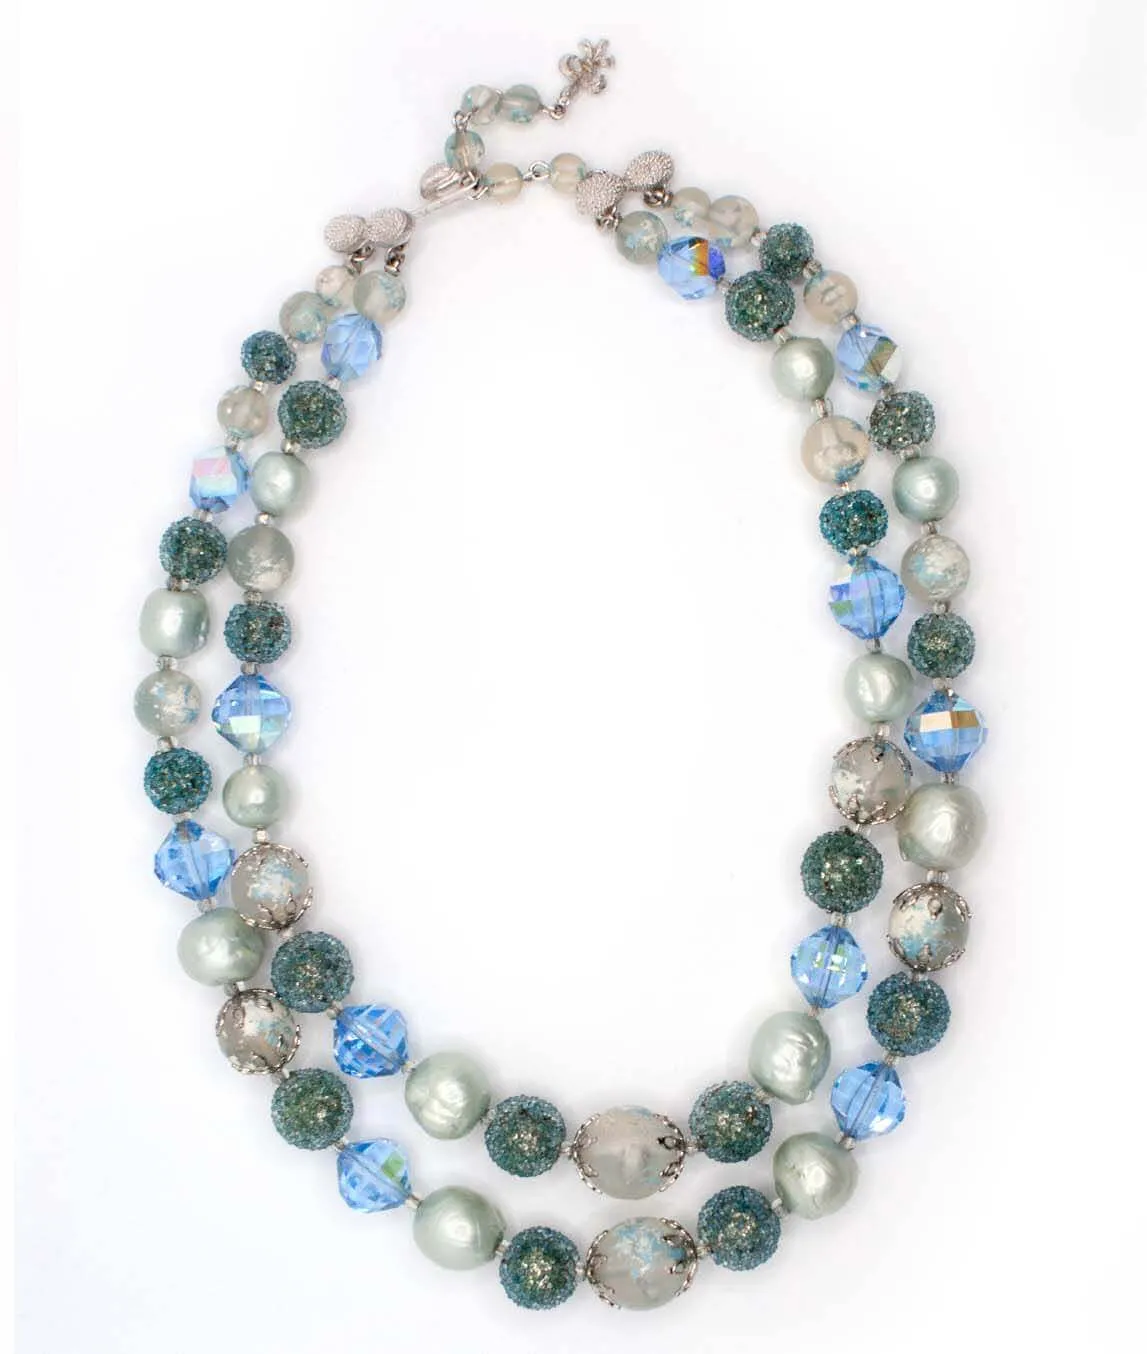 Vendôme Necklace blue green and white beads and silver tone metal